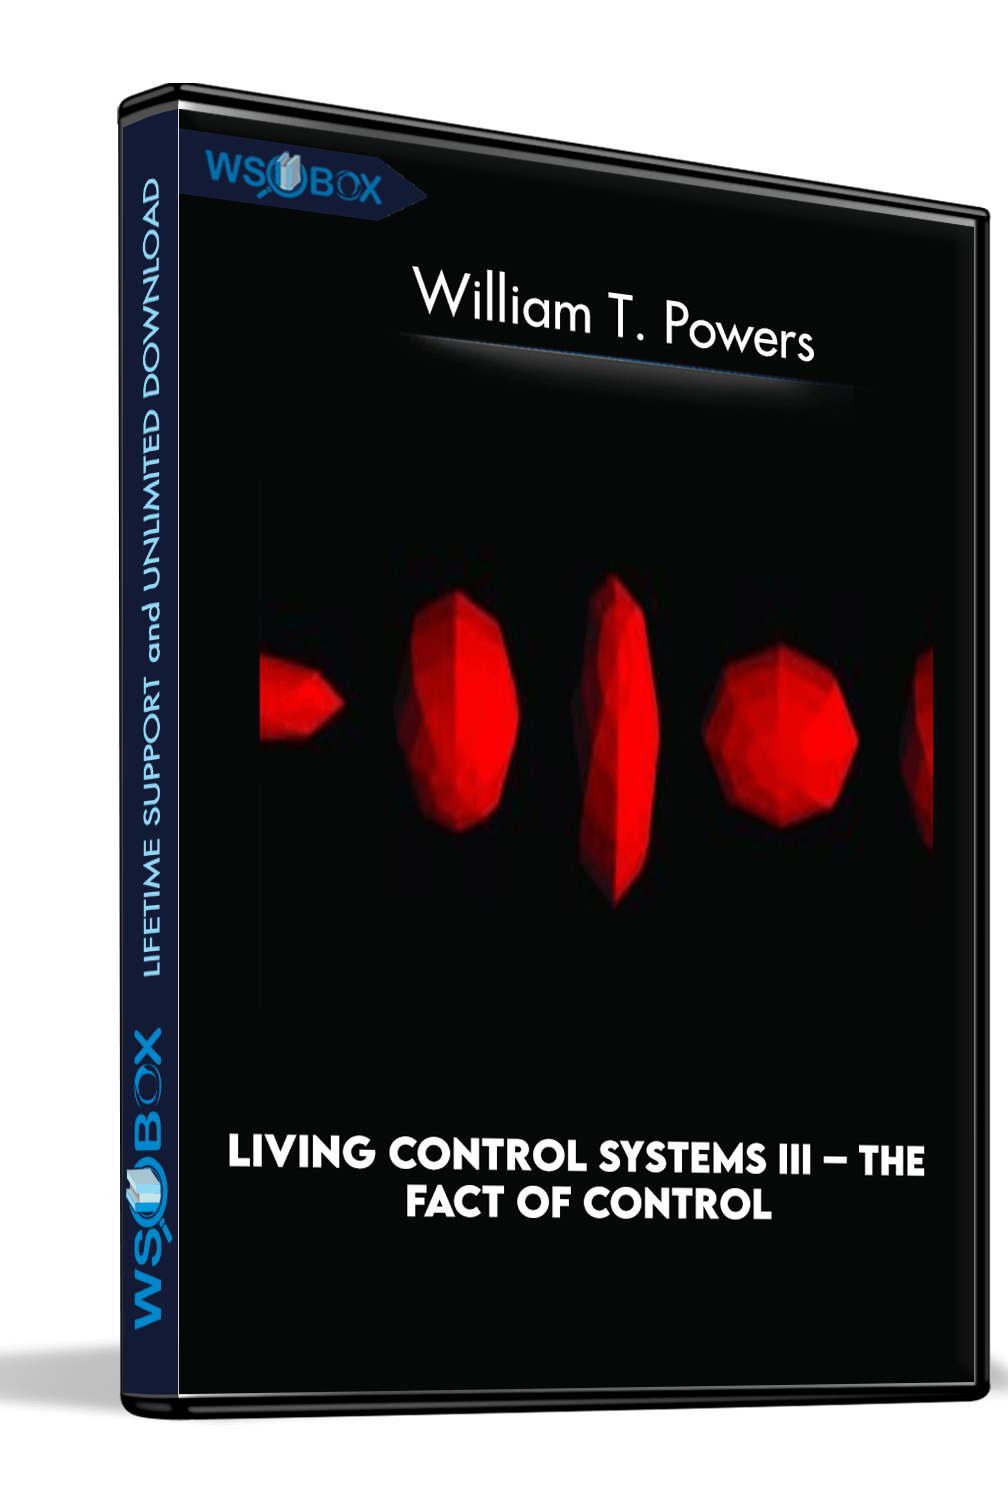 Living Control Systems III – The Fact of Control – William T. Powers